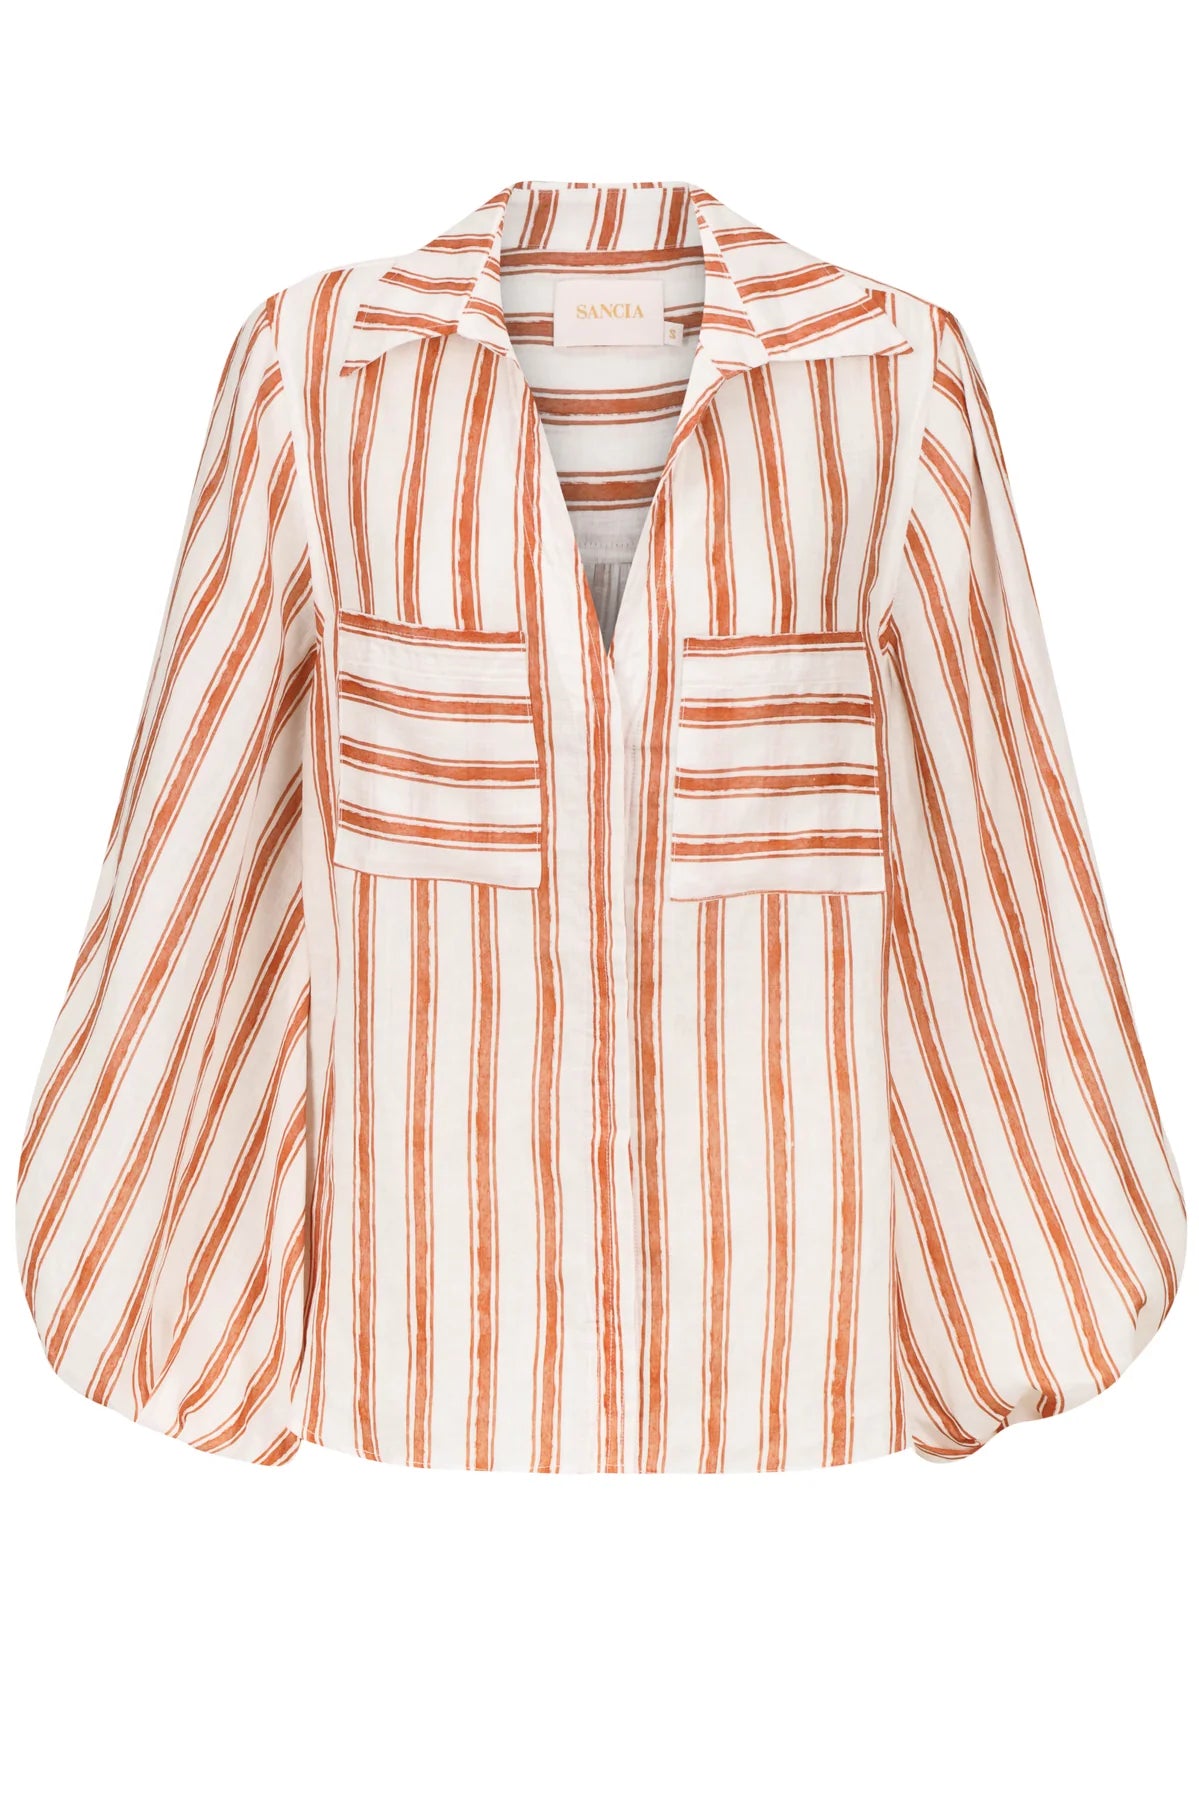 Brown and white striped linen shirt with balloon sleeves